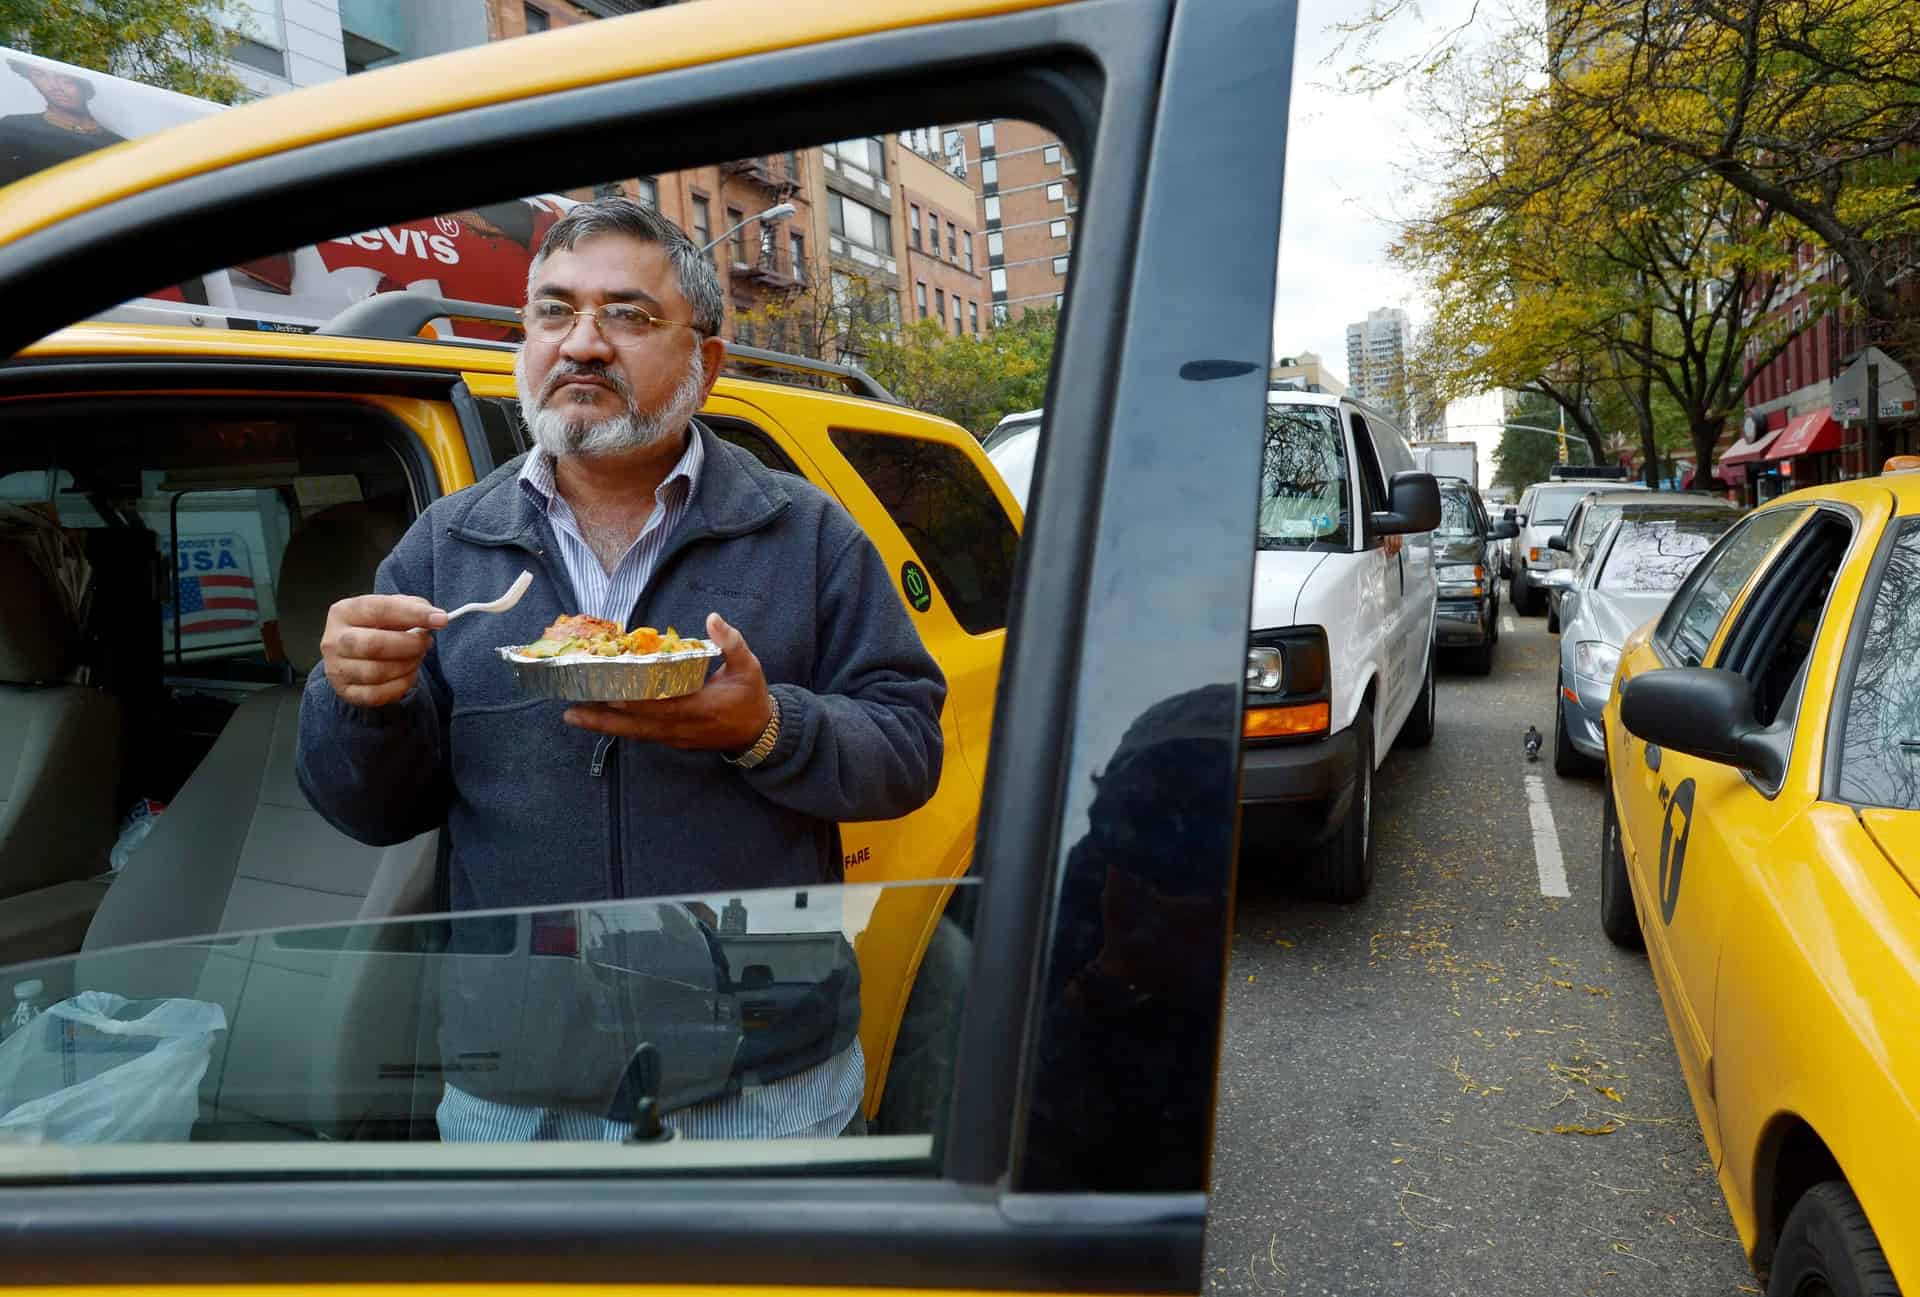 Restaurant gives taxi drivers free meals for safely getting their customers home (Canada)